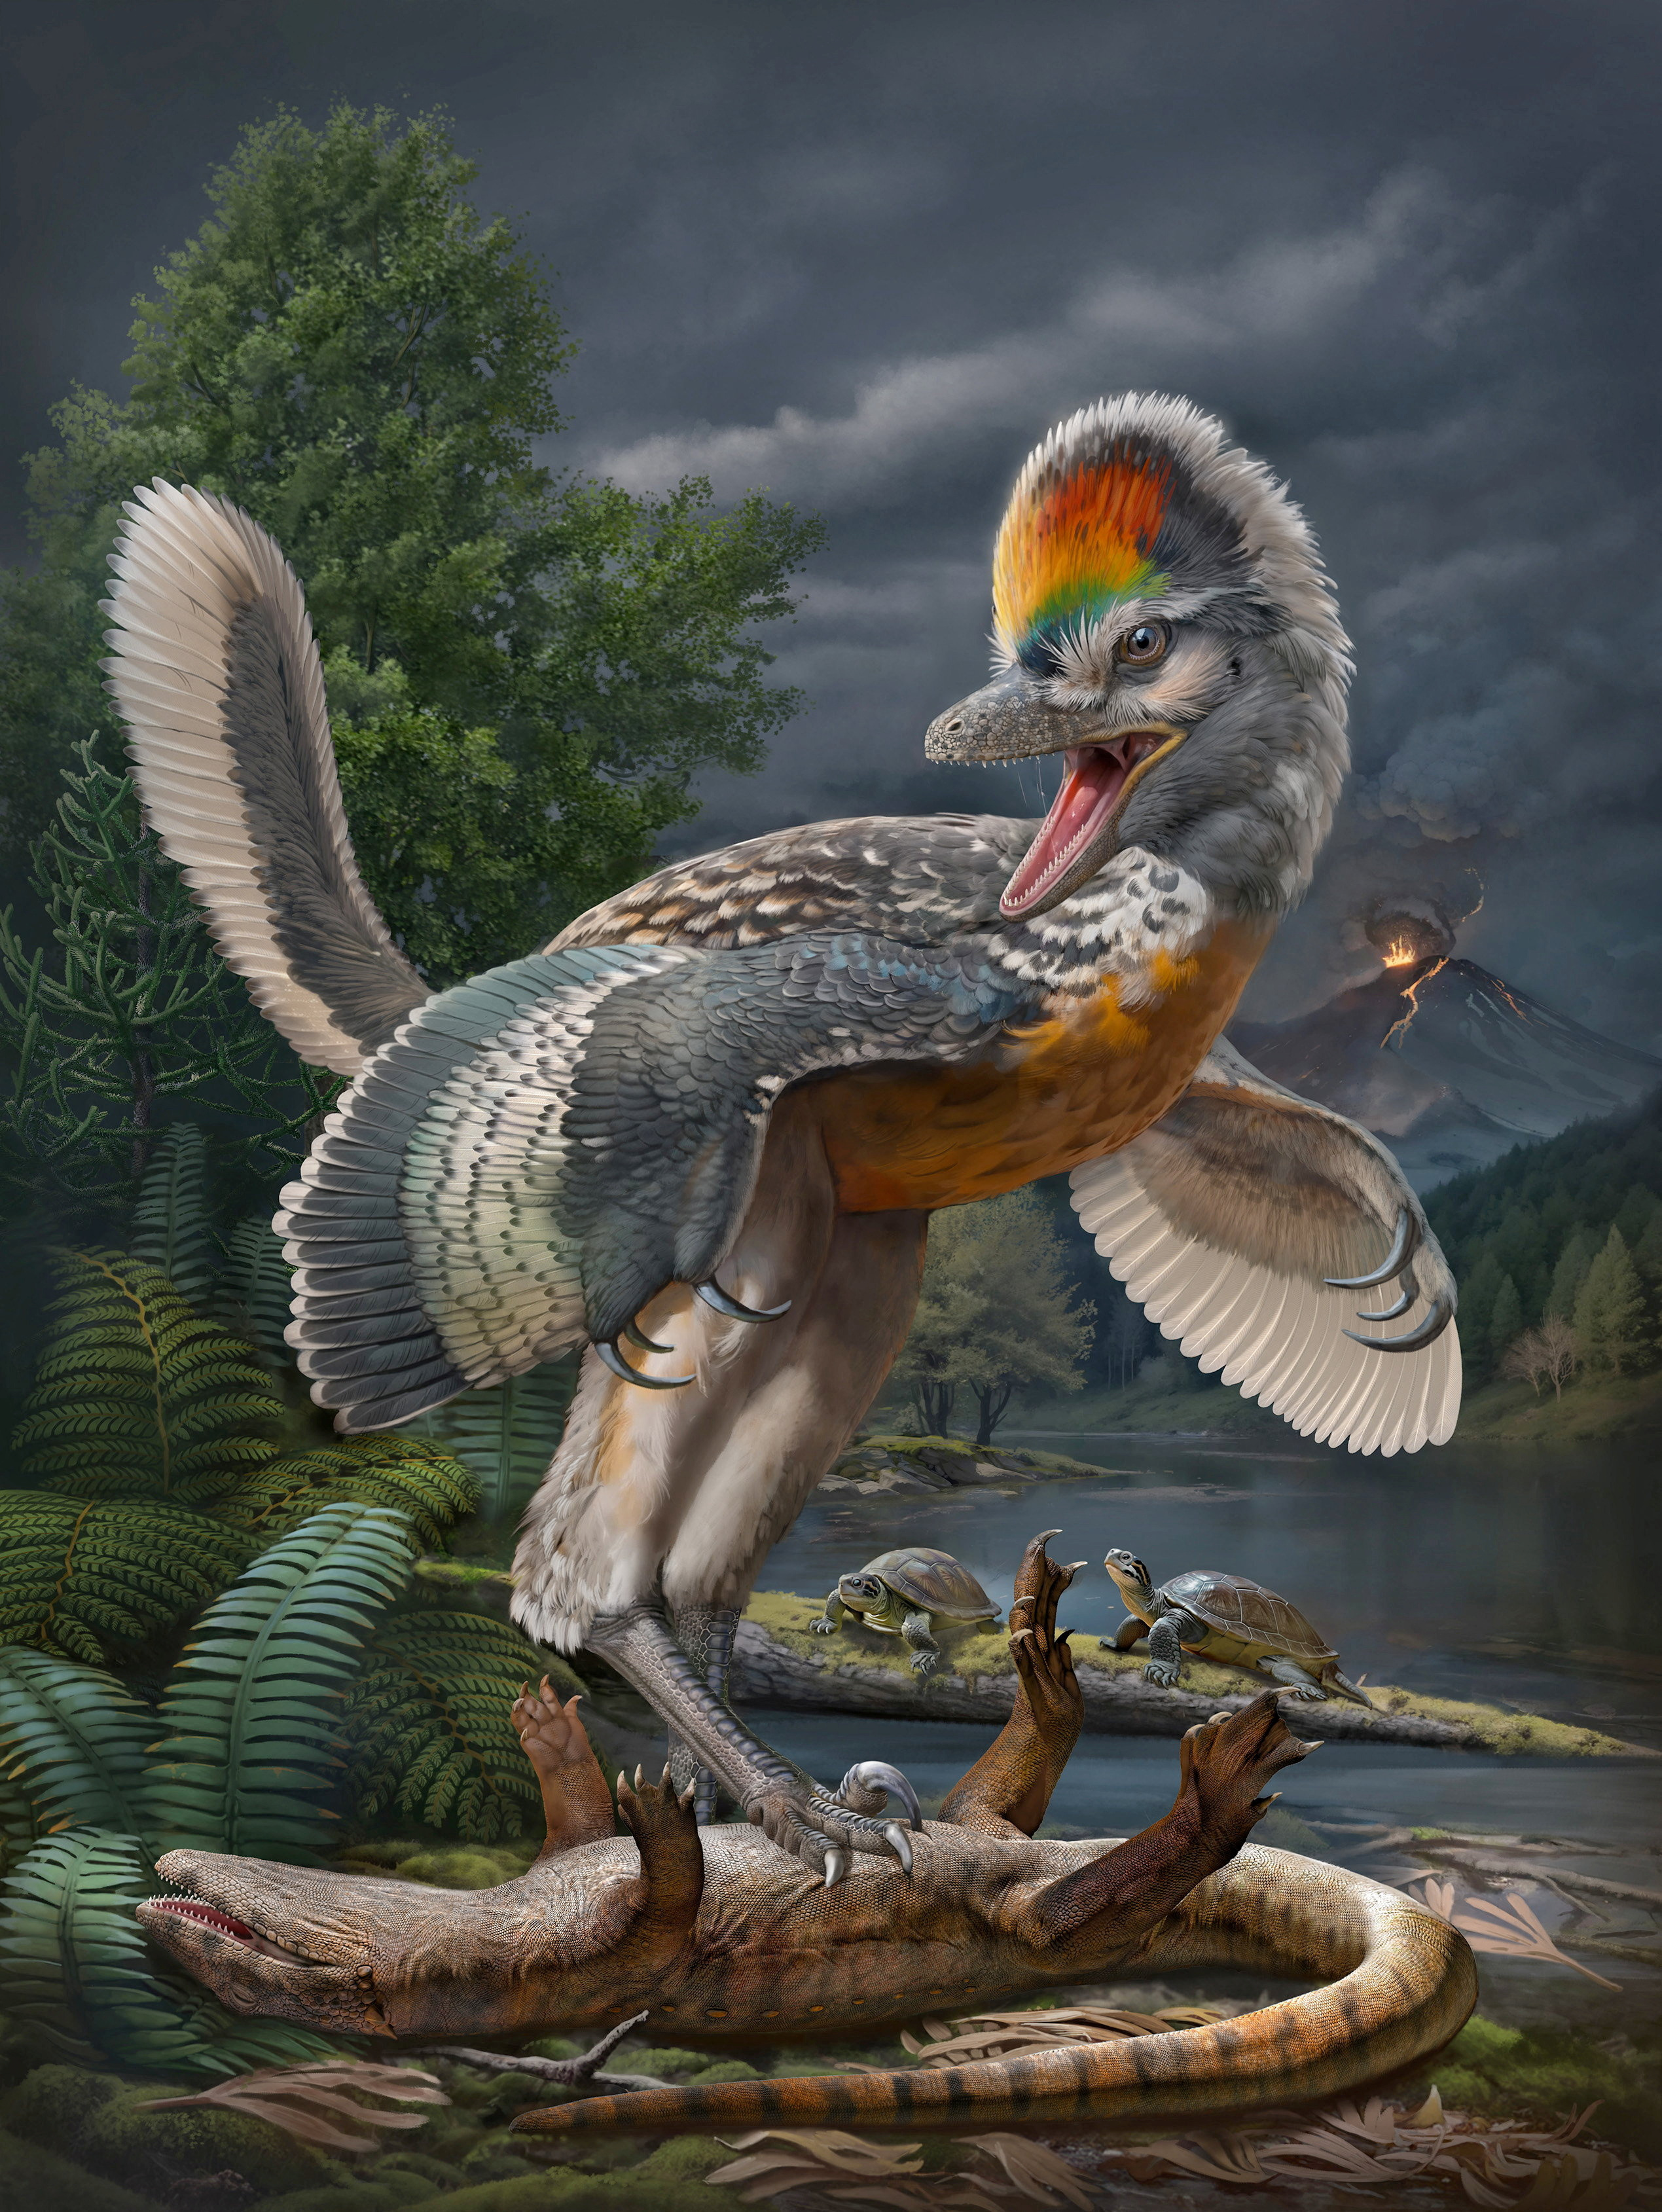 A life reconstruction of the bird-like dinosaur Fujianvenator prodigiosus, which lived 148 million to 150 million years ago in China